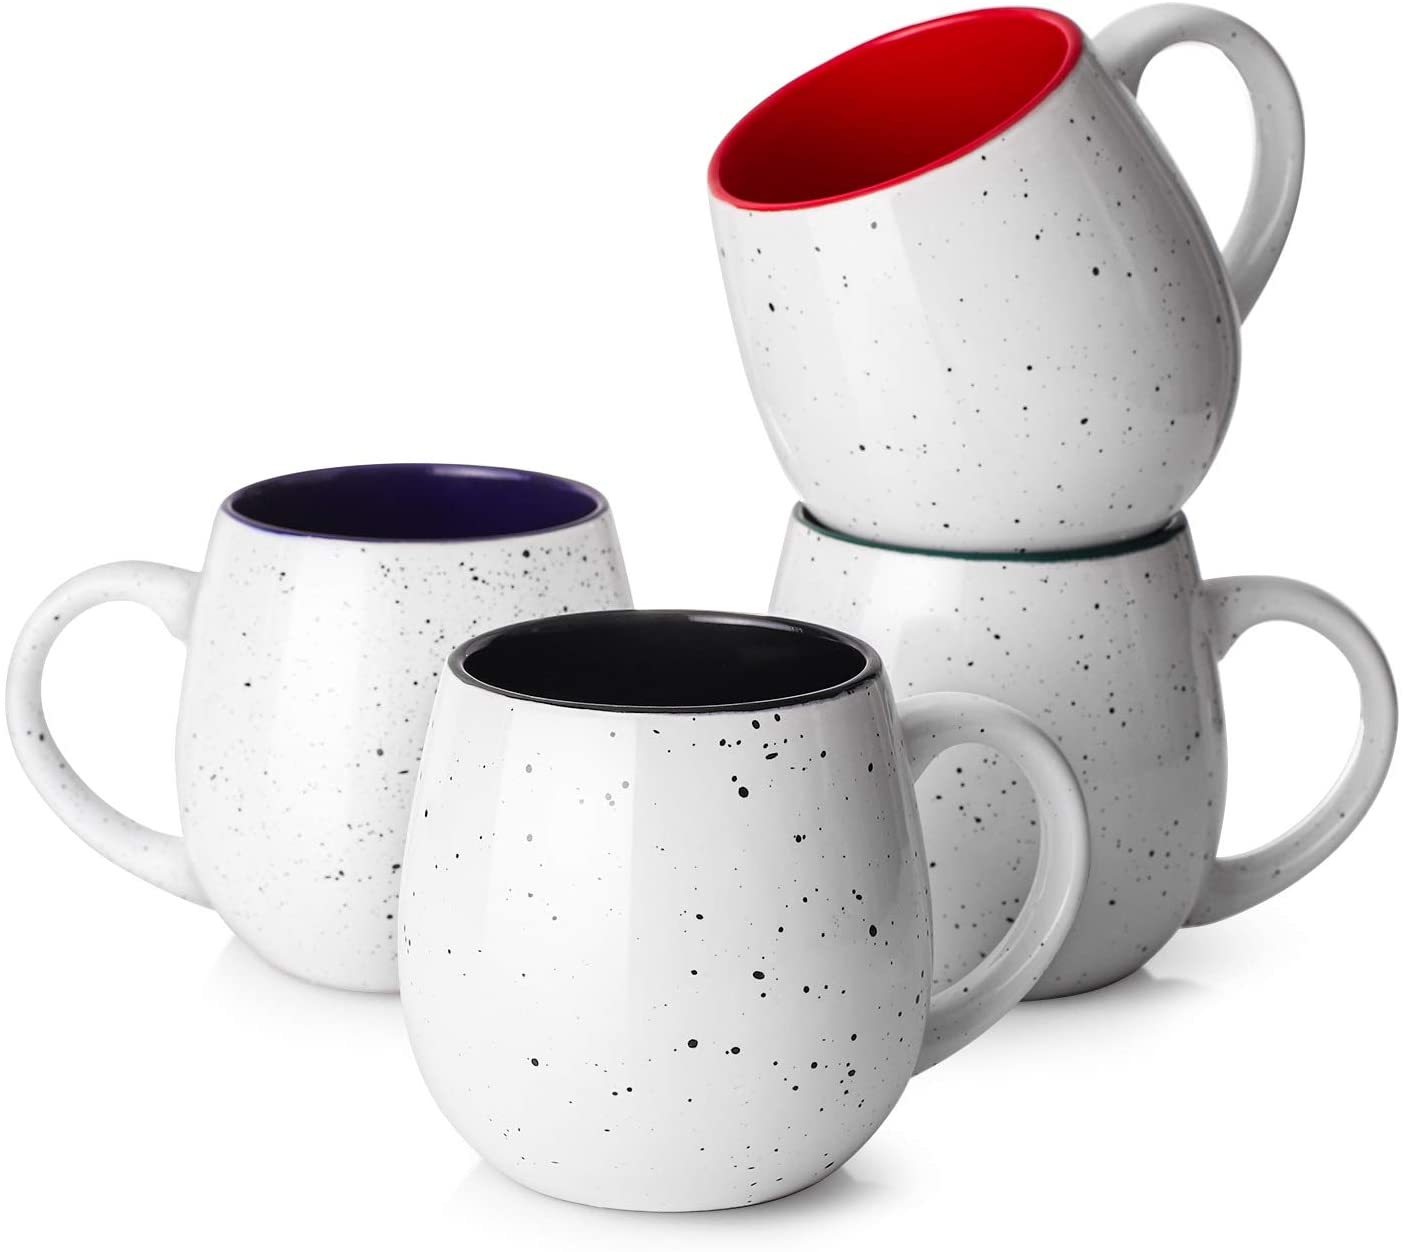 14 Best Large Coffee Mugs for Every Collection | Relaxing Decor